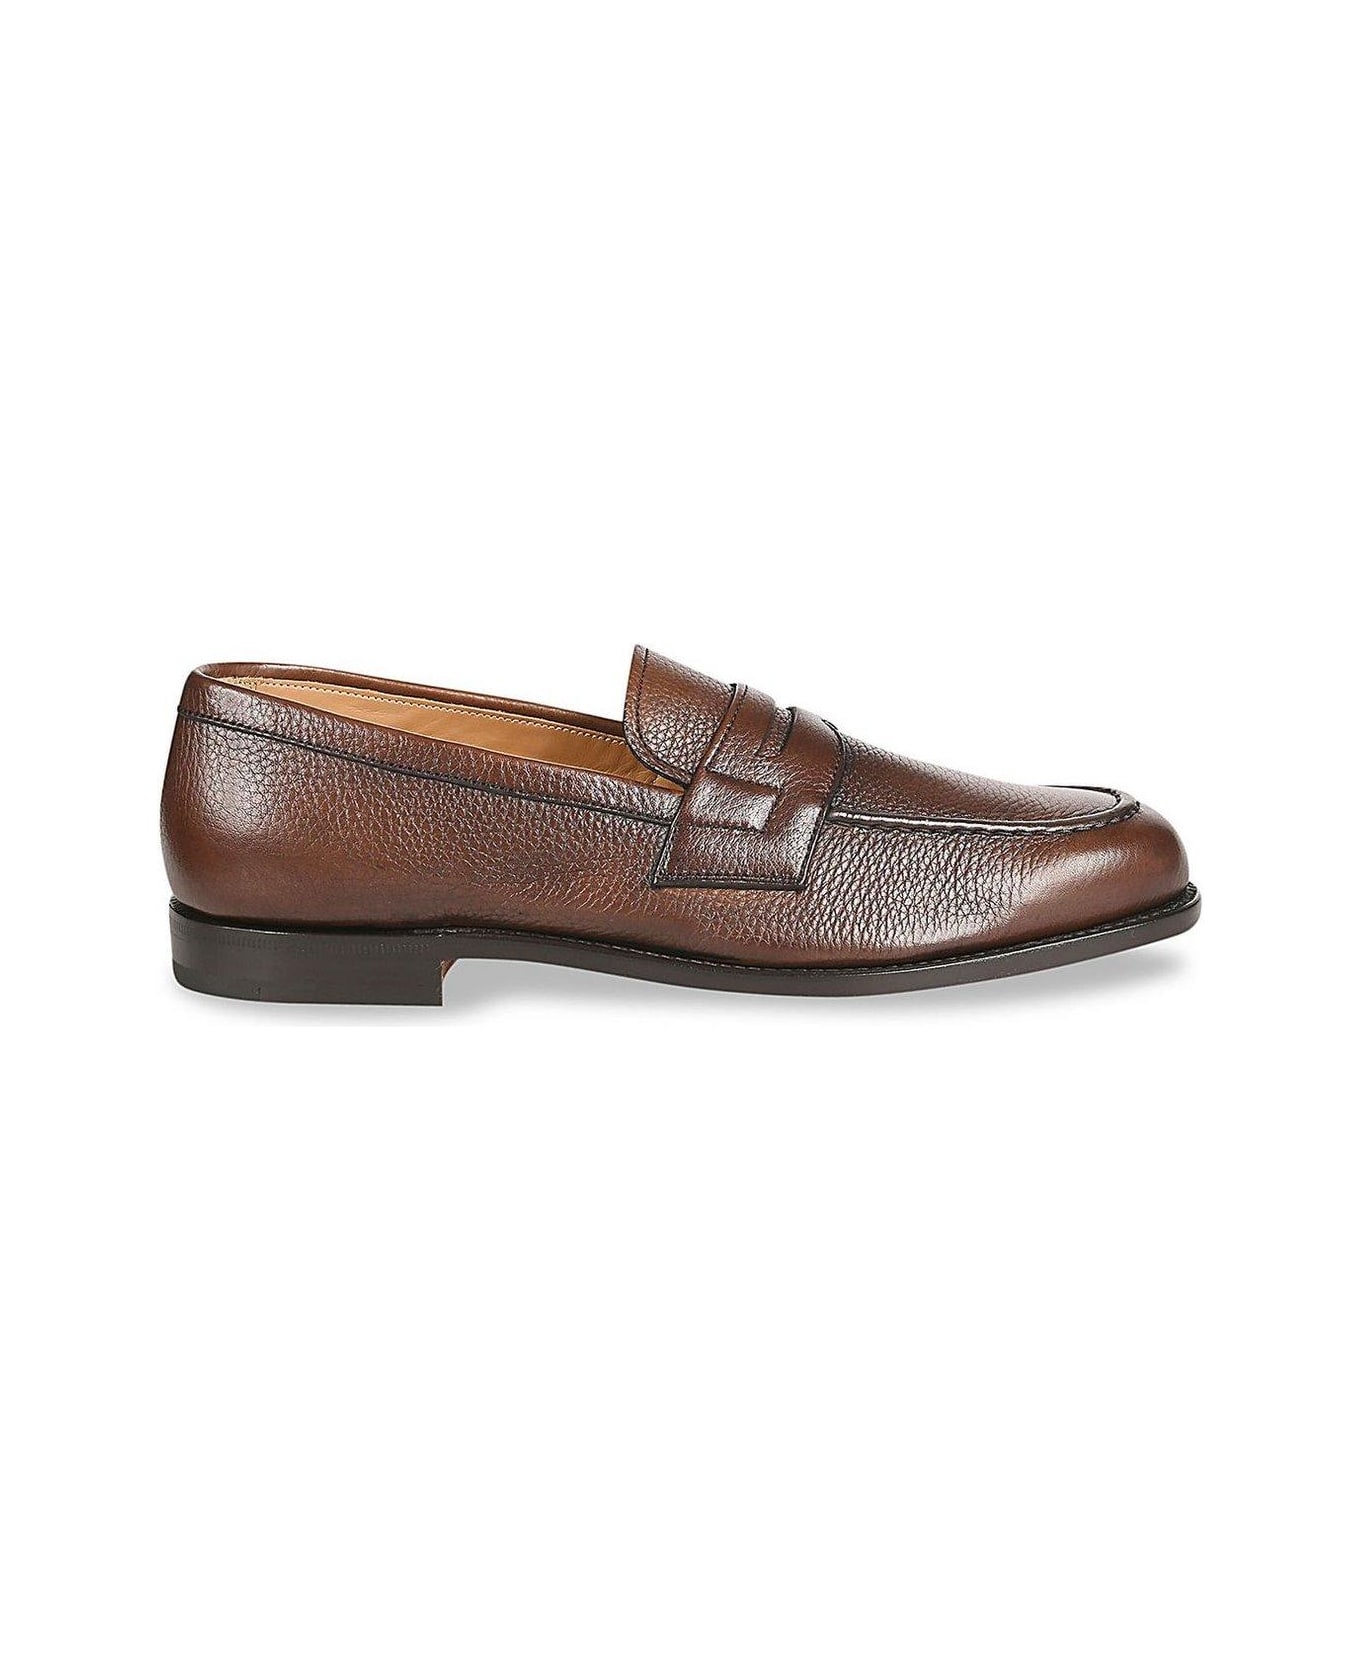 Church's Heswall Slip-on Loafers - Bruciato